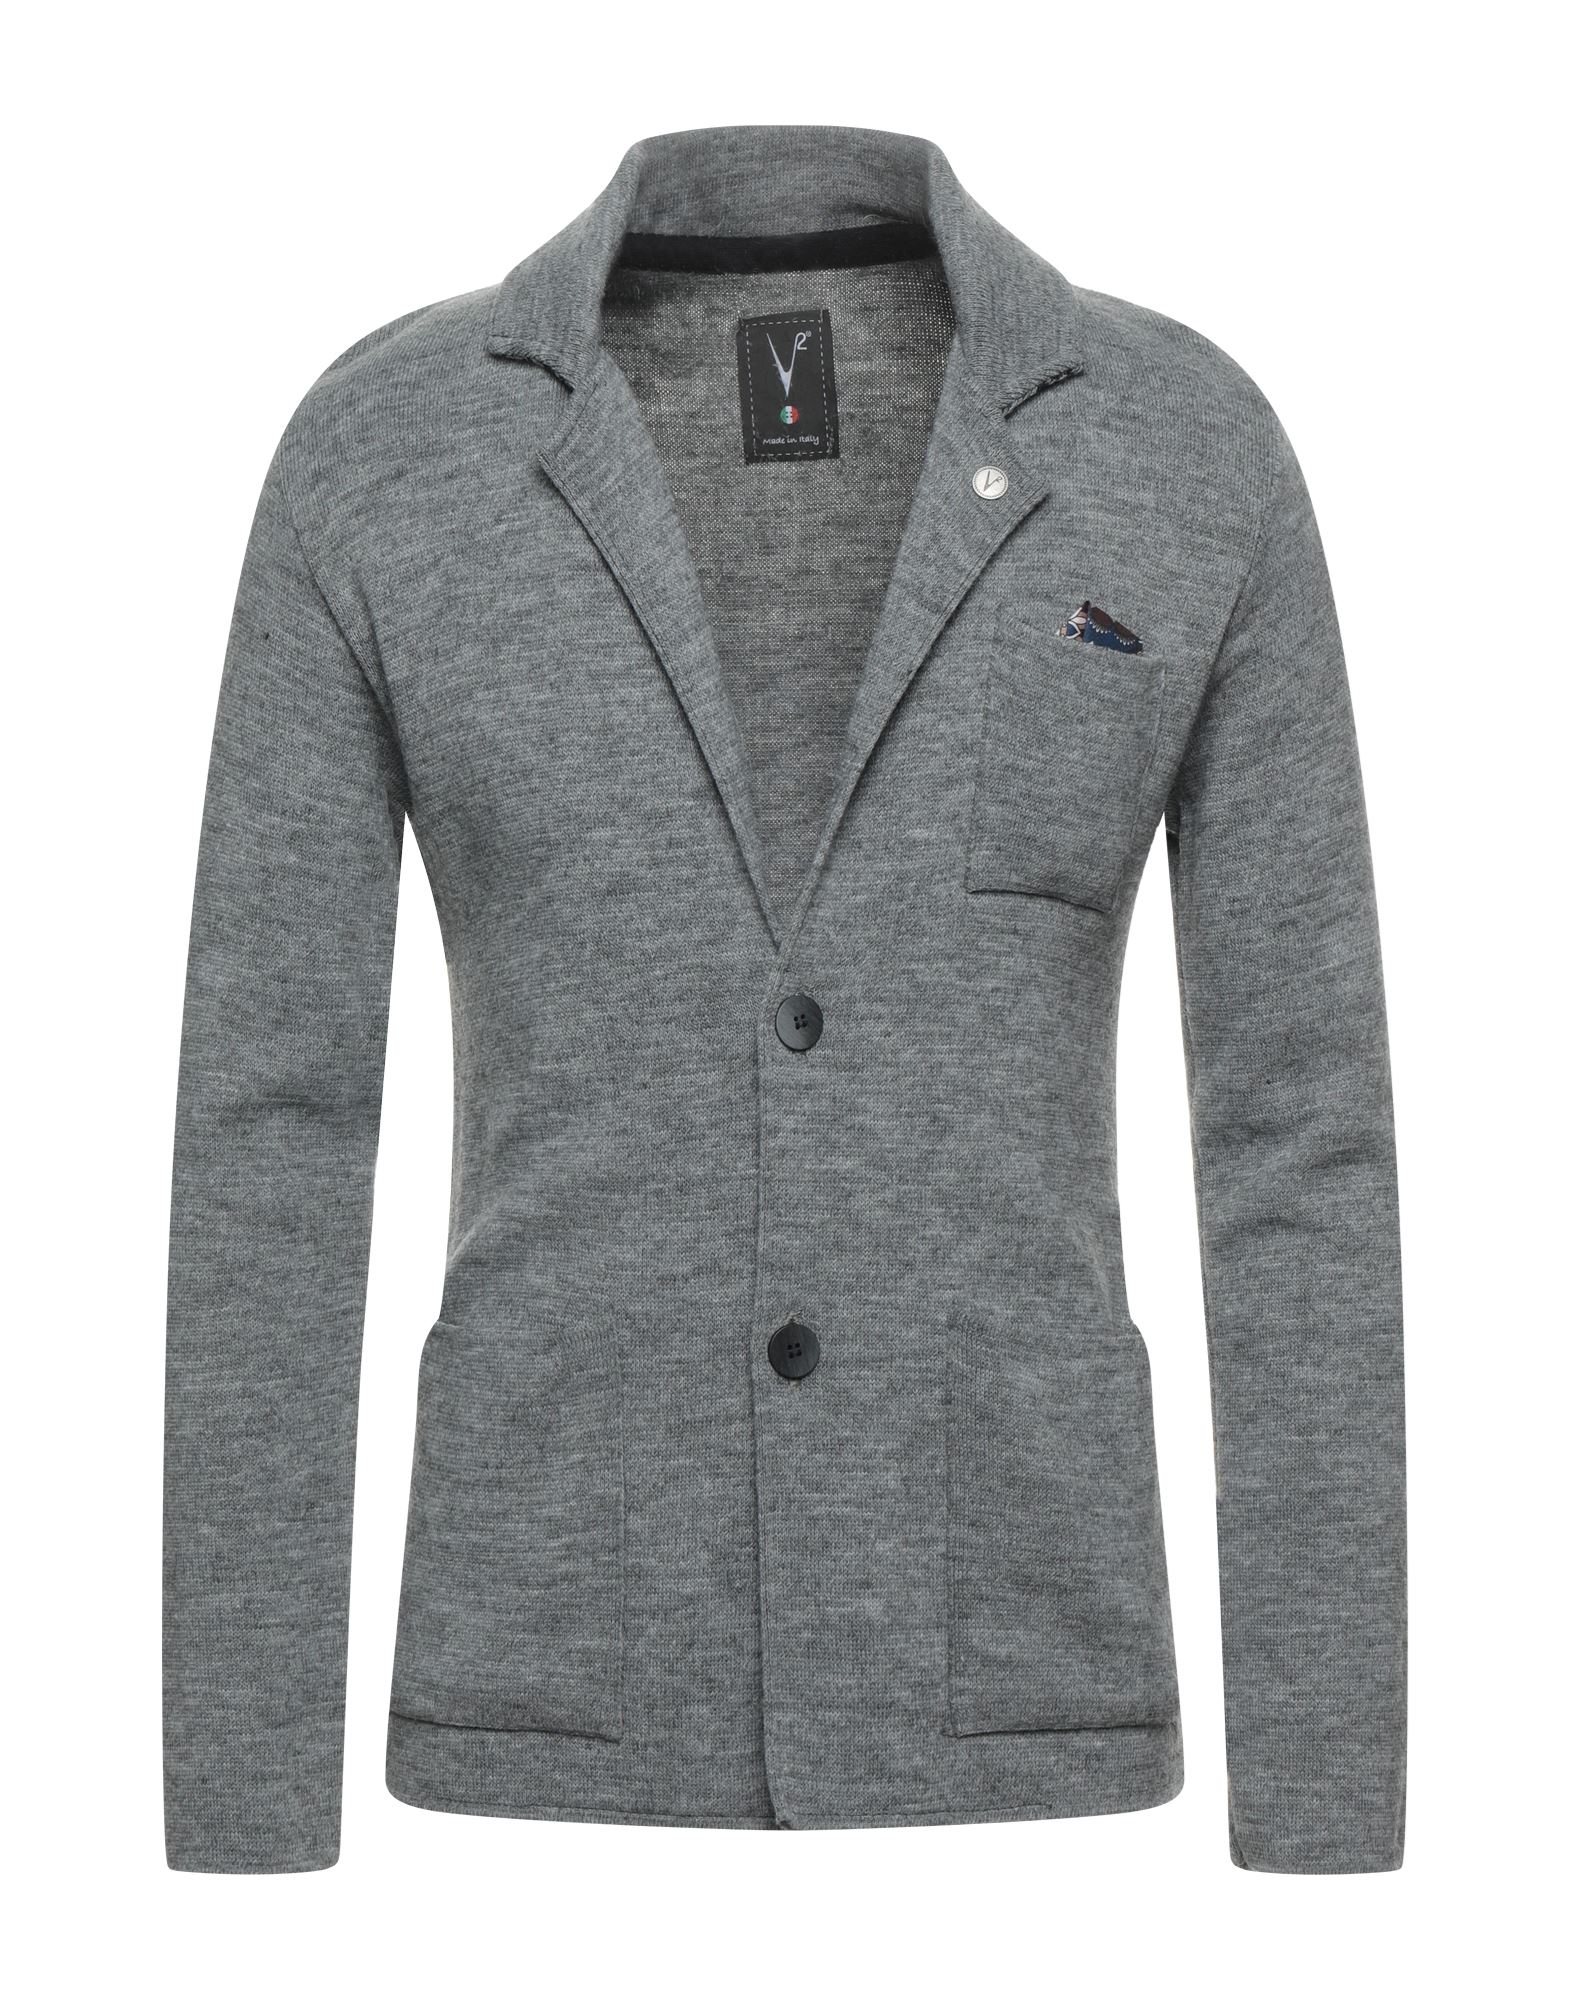 V2® Brand Suit Jackets In Grey